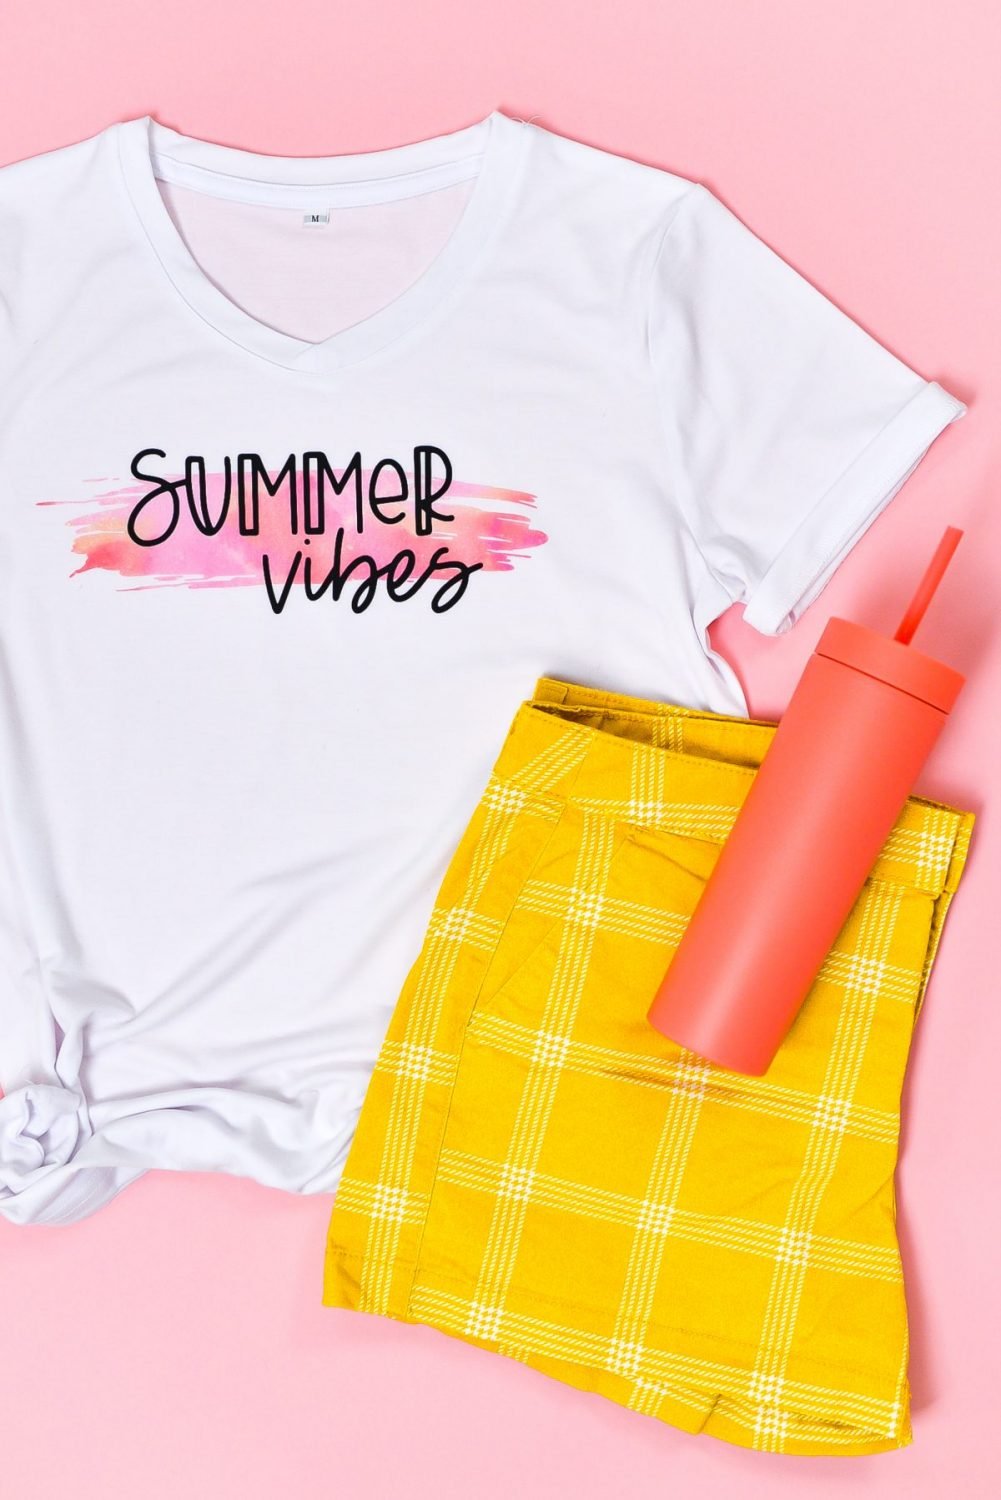 Final Summer Vibes shirt staged with flip flops, water bottle, and shorts on pink background